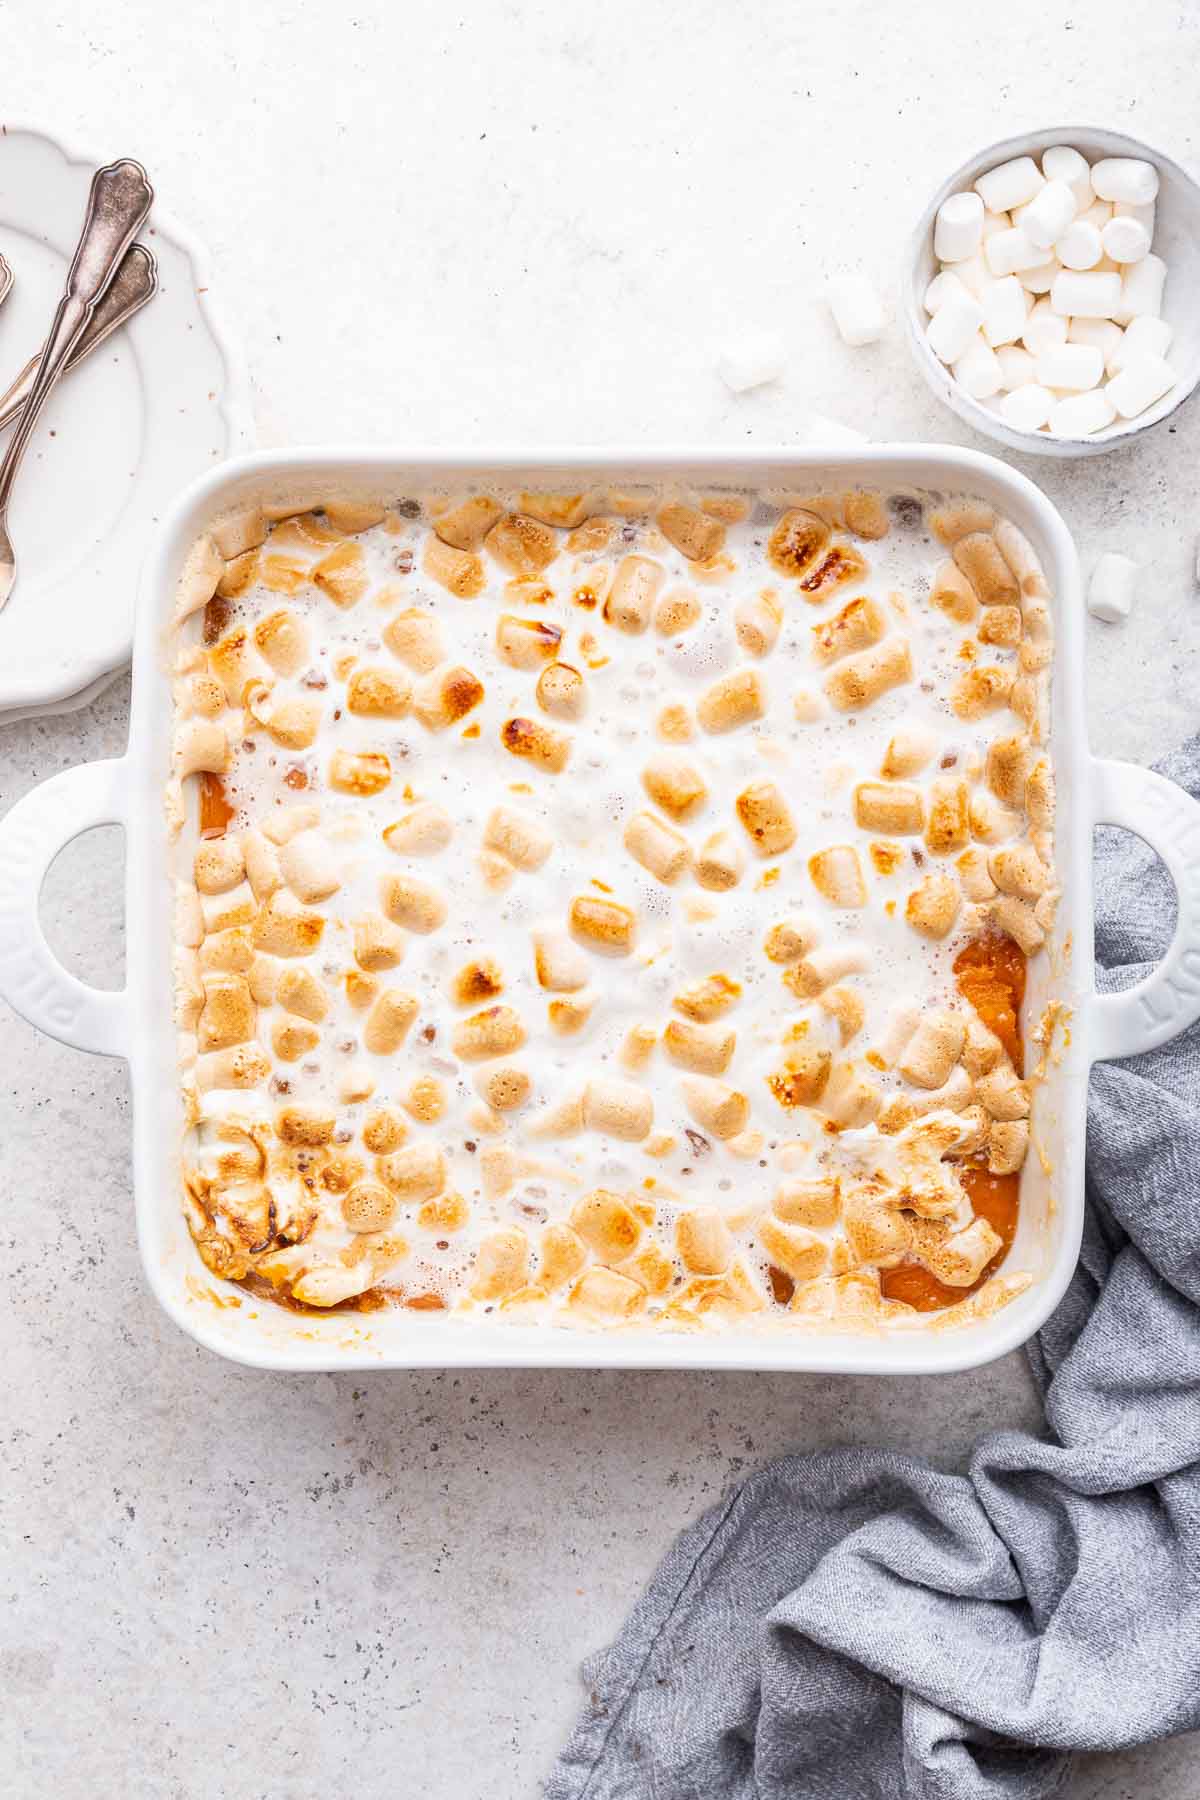 Vertical image of sweet potato casserole topped with marshmallows.